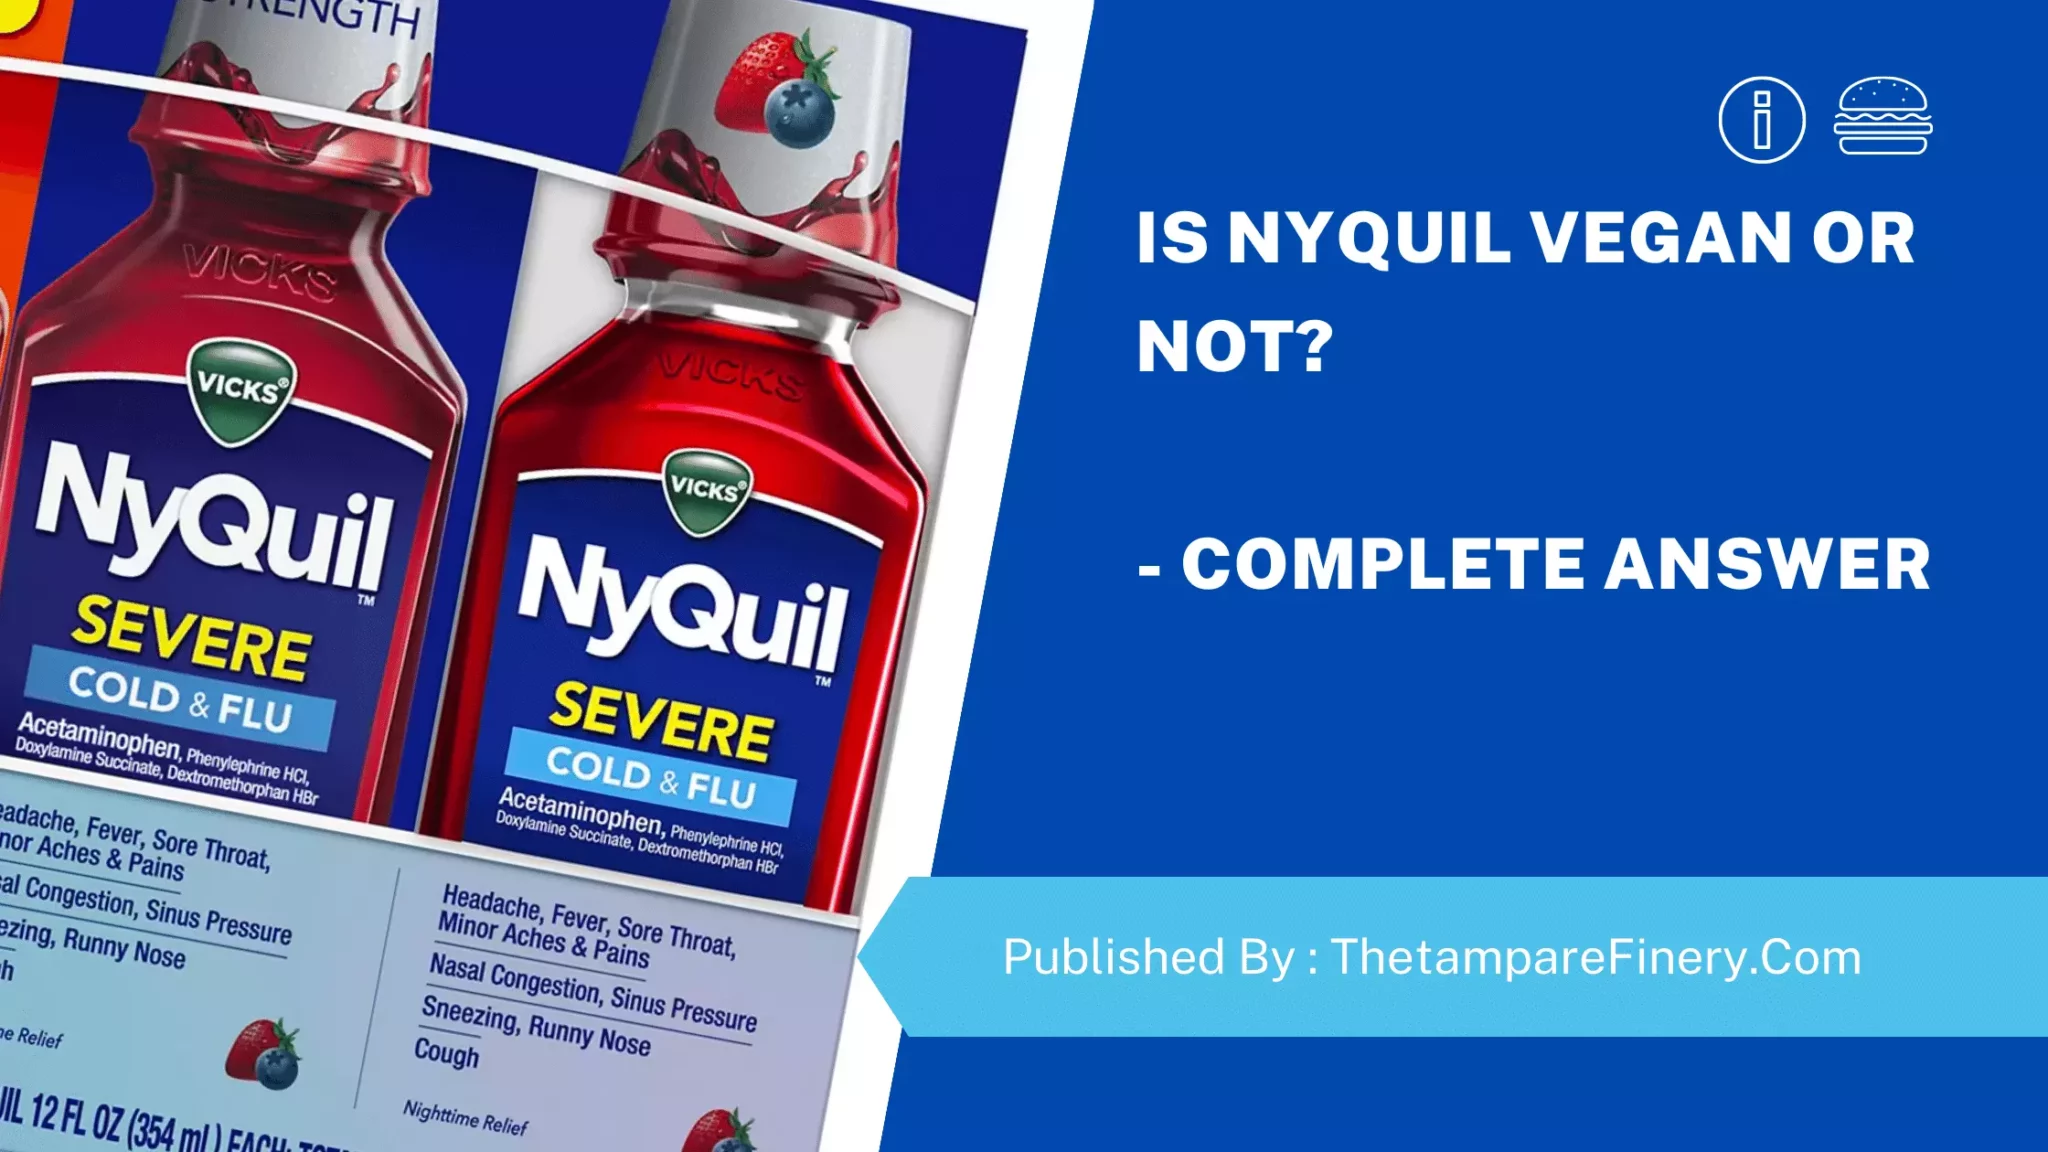 Is NyQuil Vegan or Not